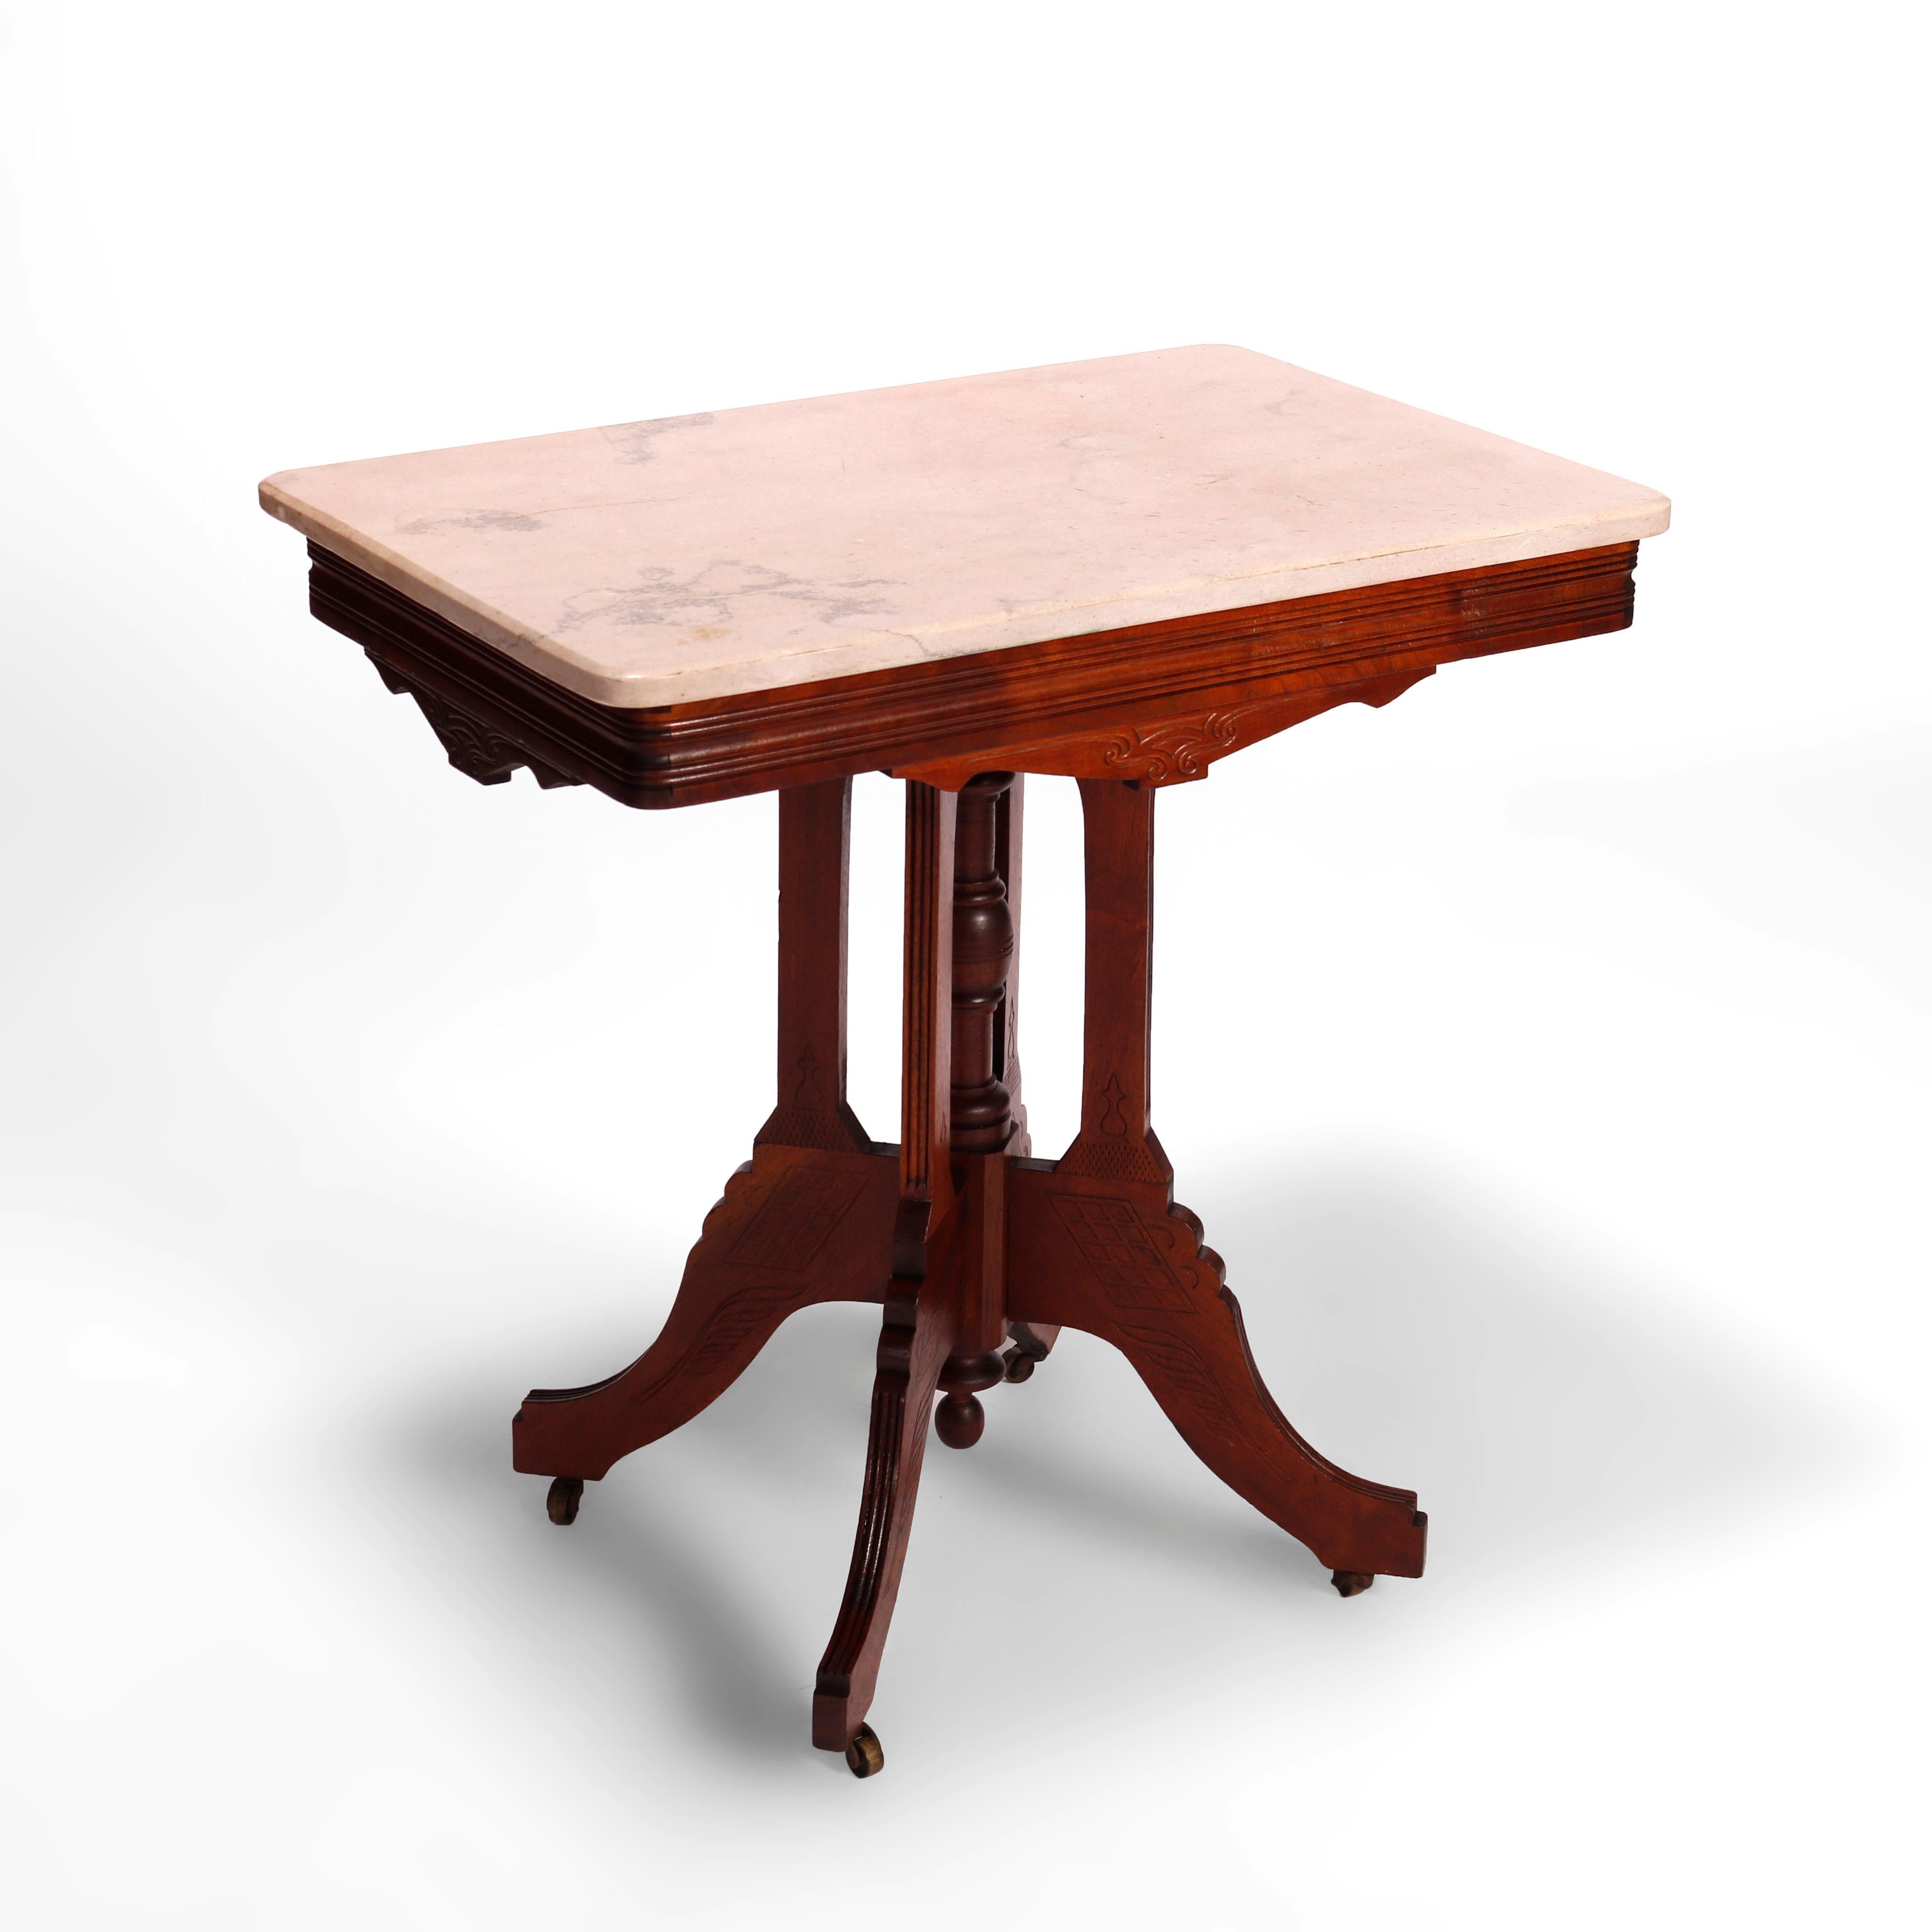 An antique Eastlake parlor table offers marble top over walnut base having shaped skirt, four supports with central turned column and raised on stylized cabriole legs, incised lattice and urn decorations throughout, c1890.

Measures- 30''H x 30''W x